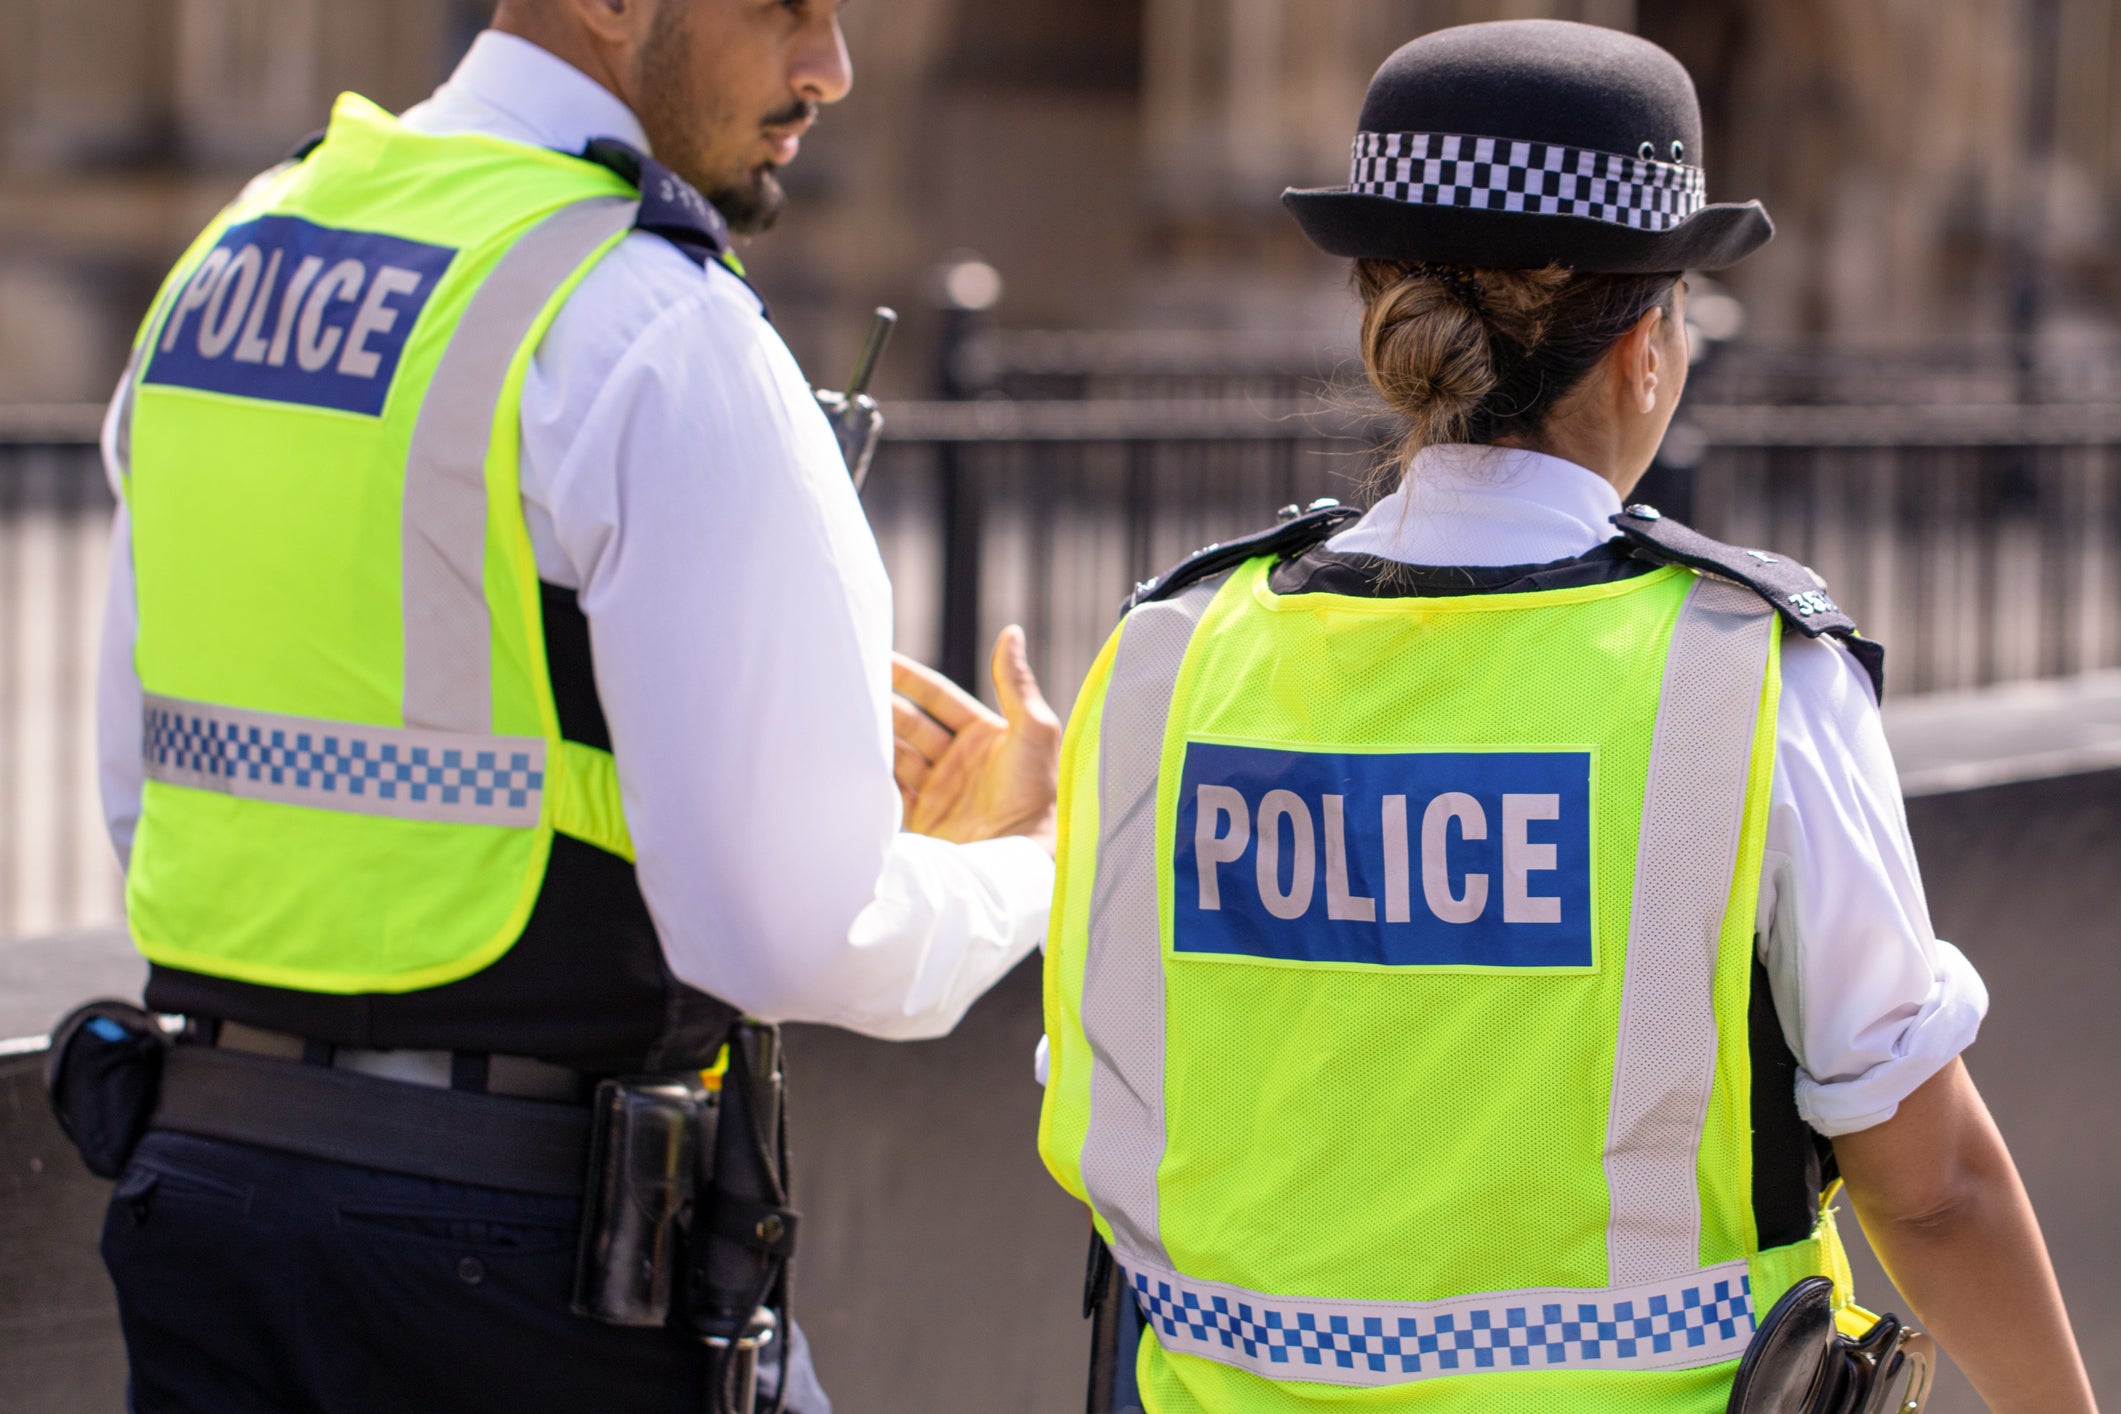 An additional 1,000 officers are patrolling ‘vulnerable’ areas in London